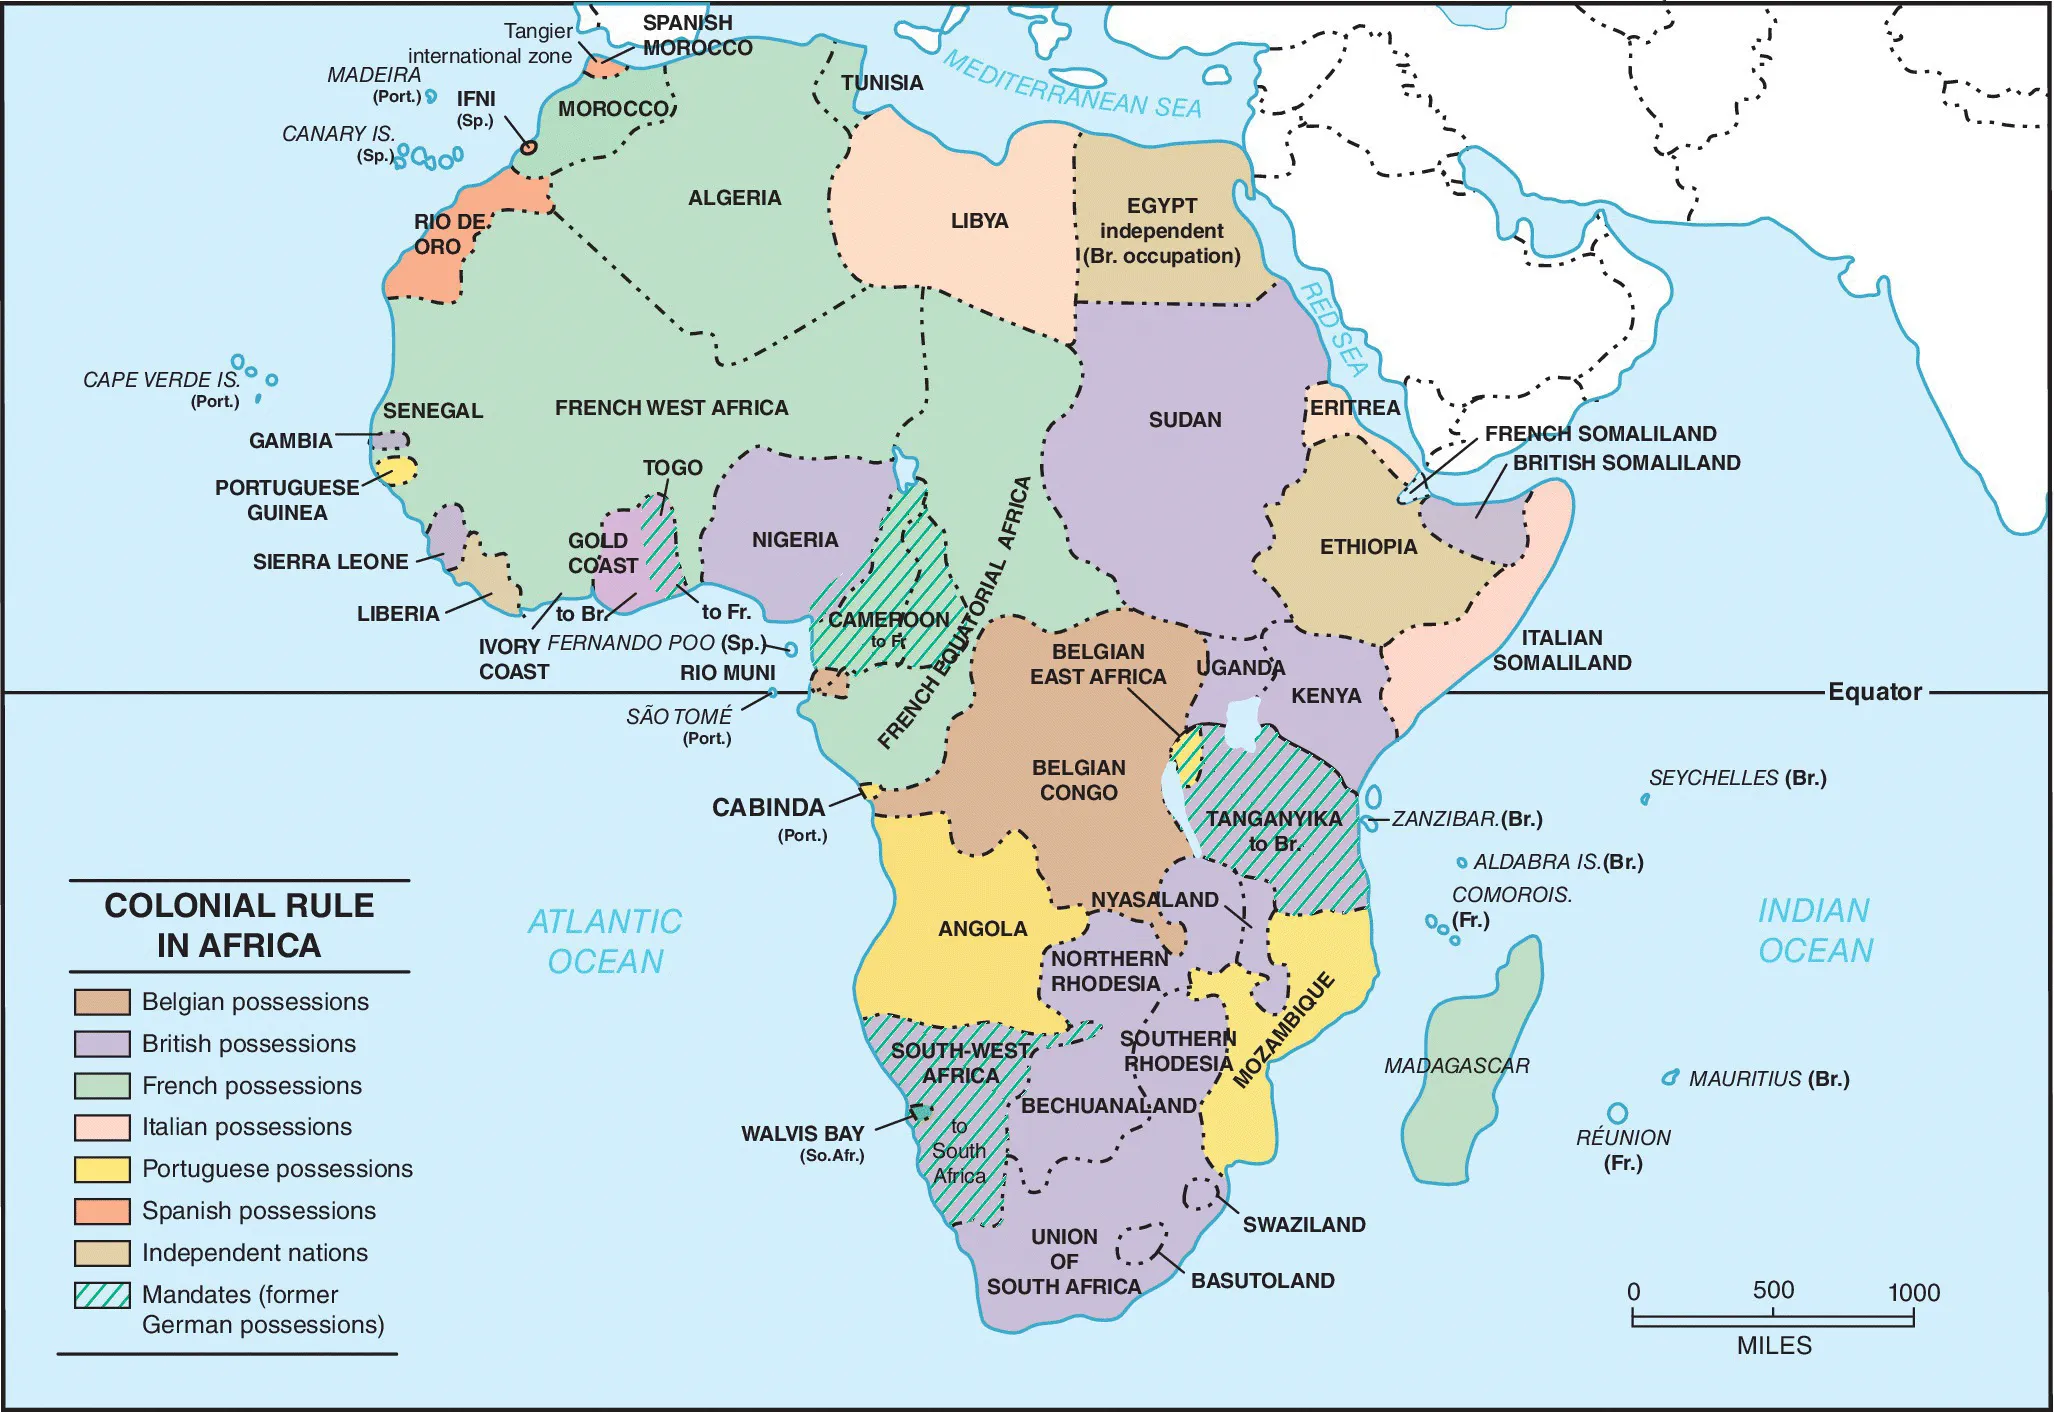 Map of Africa illustrating the European colonization, with various shades representing countries under Belgian, British, French, Italian, Portuguese, Spanish possessions.